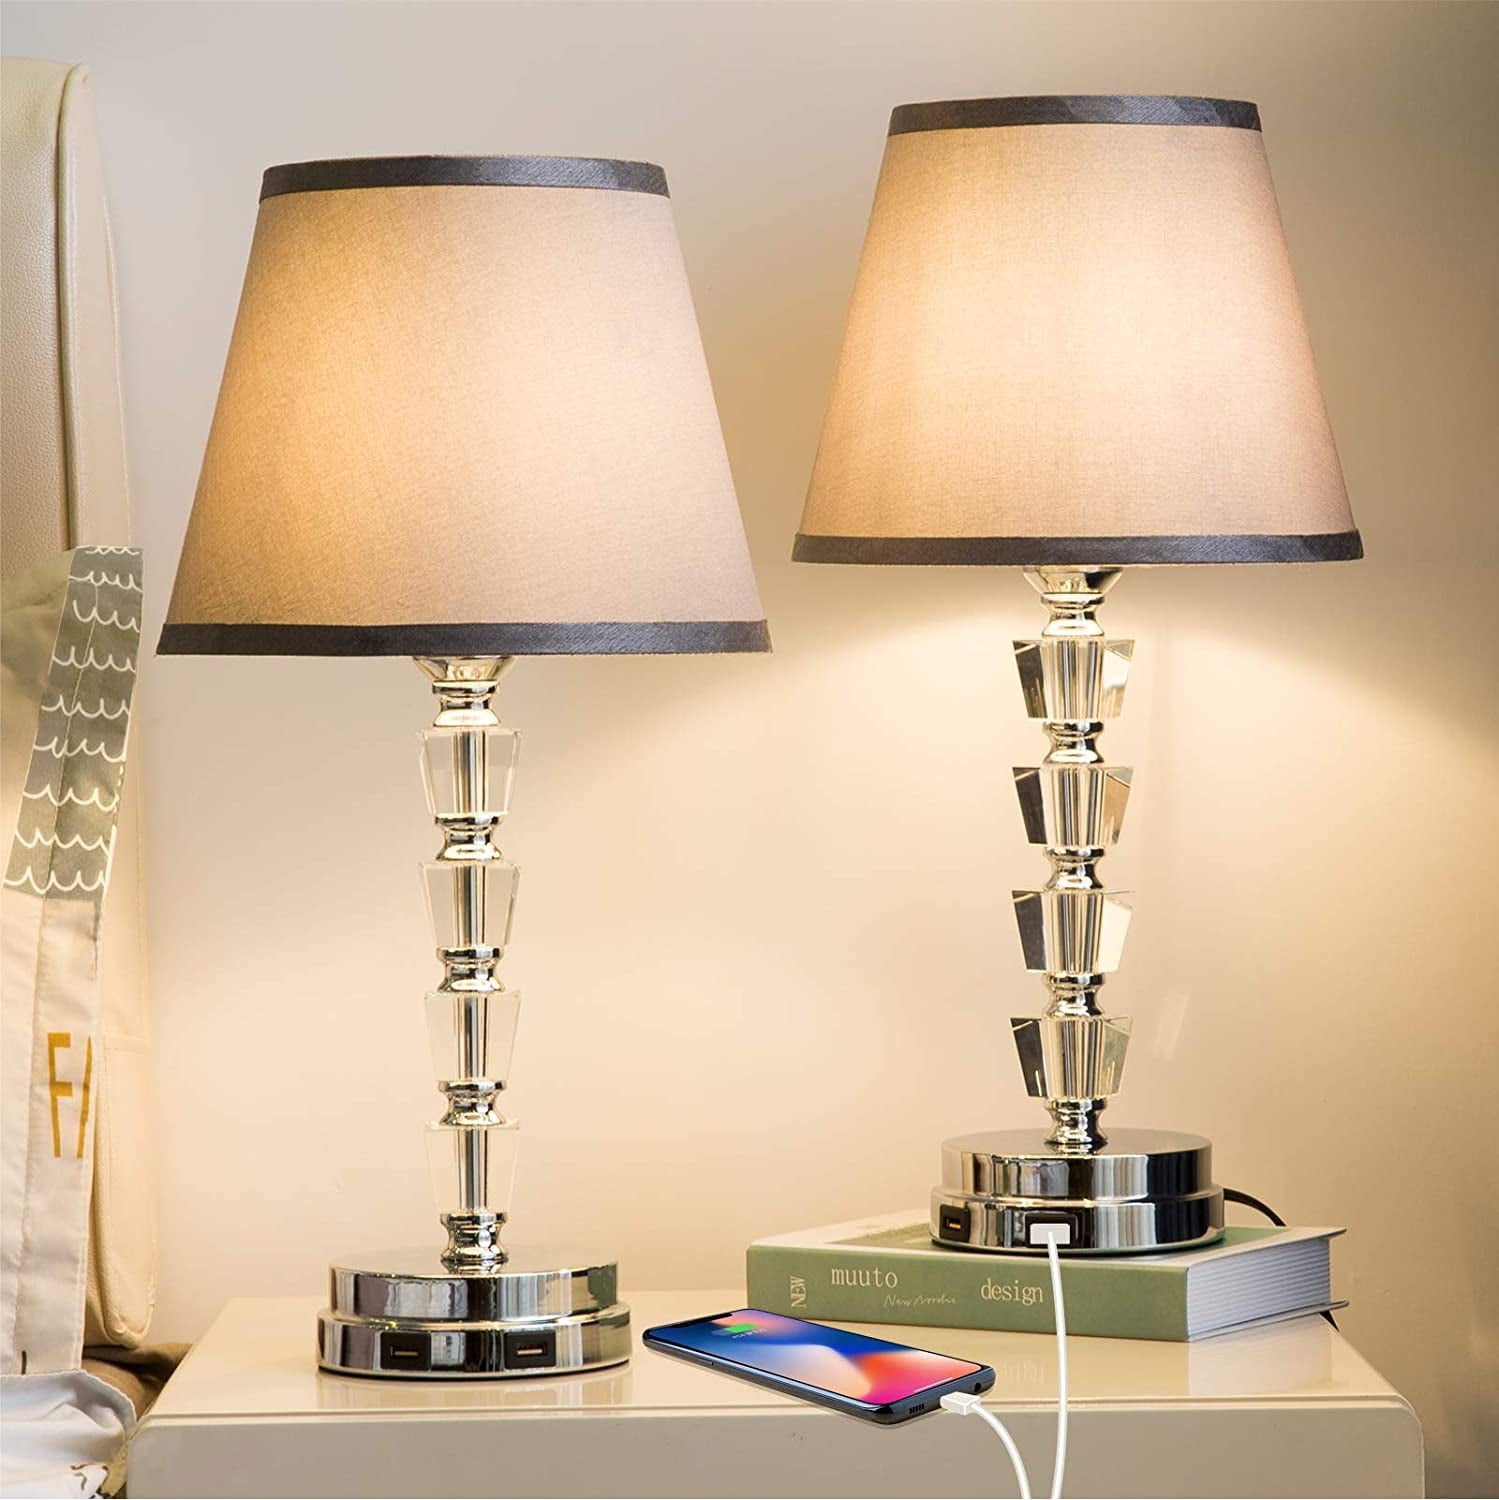 Lifeholder Bedside Lamp, Exquisite Crystal Lamp with Dual USB Ports